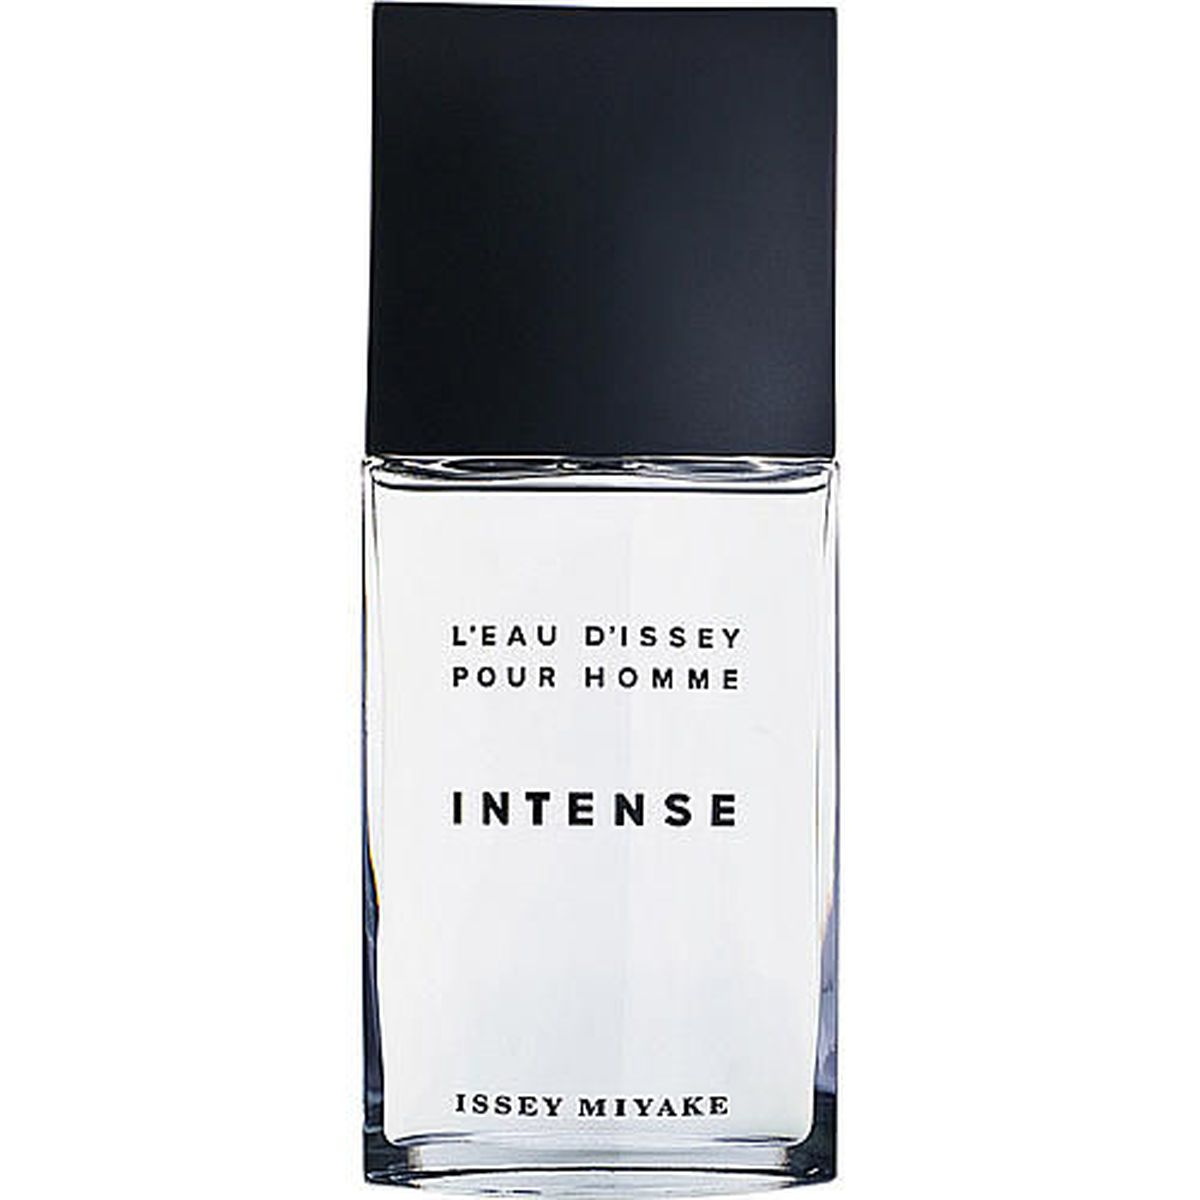 Issey Miyake L'eau d'Issey pour Homme Intense Toaletná voda - Tester 125ml